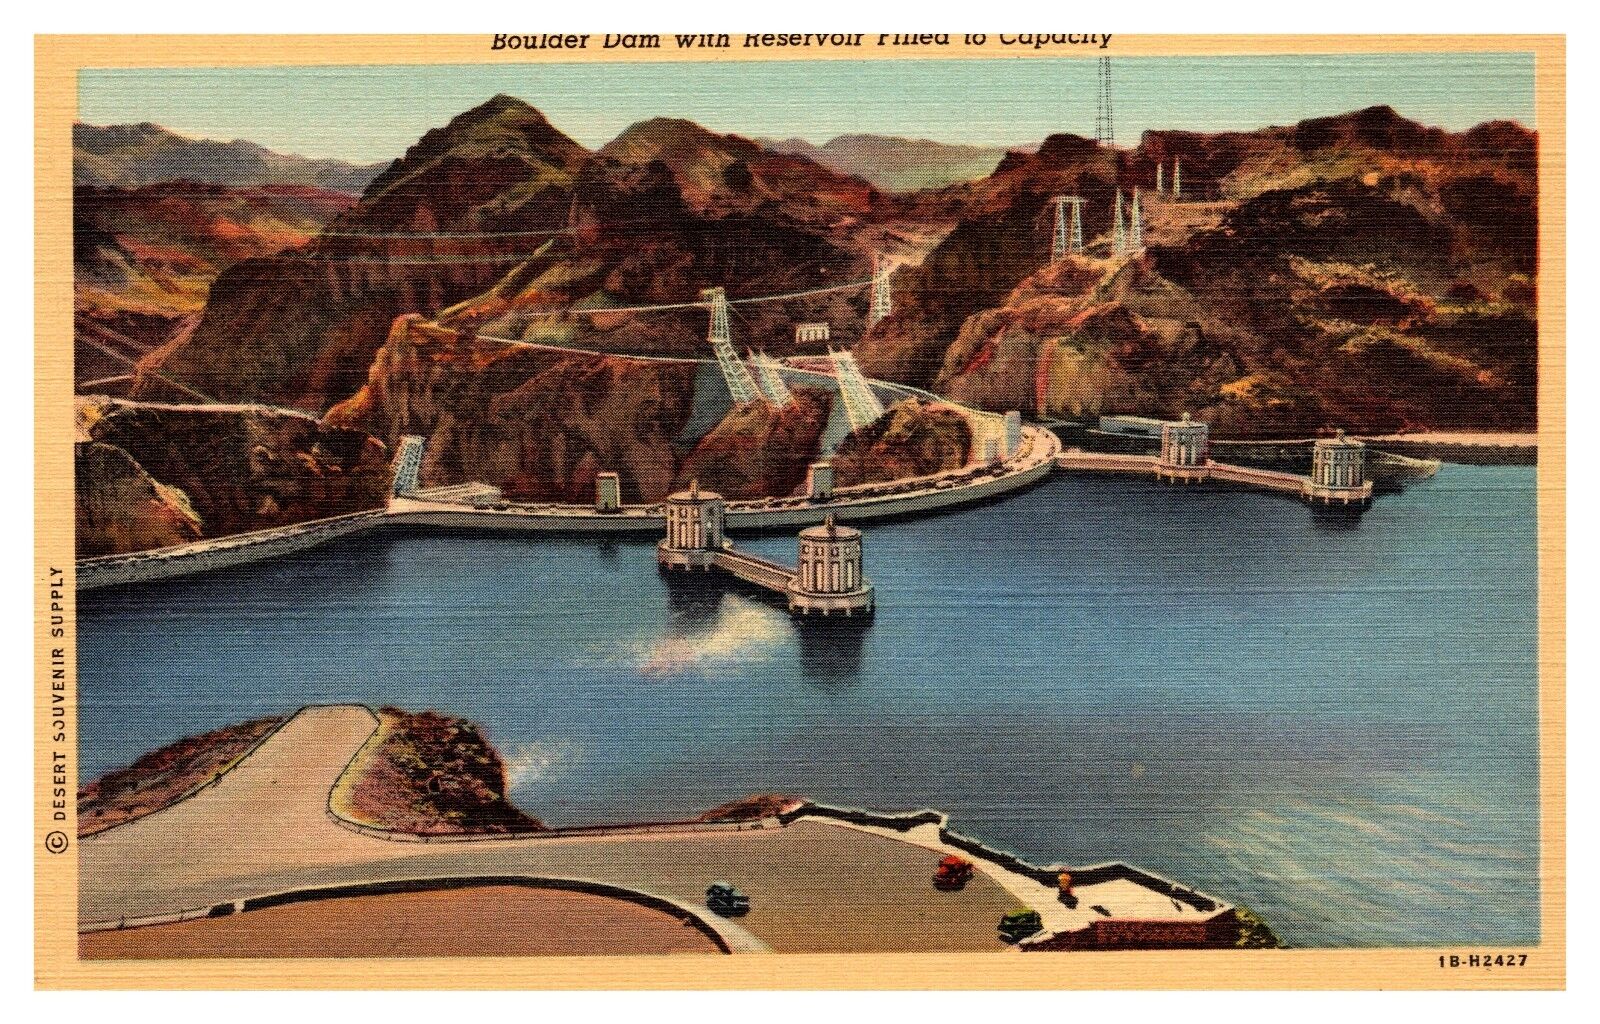 Boulder Dam with Reservoir Filled to Capacity